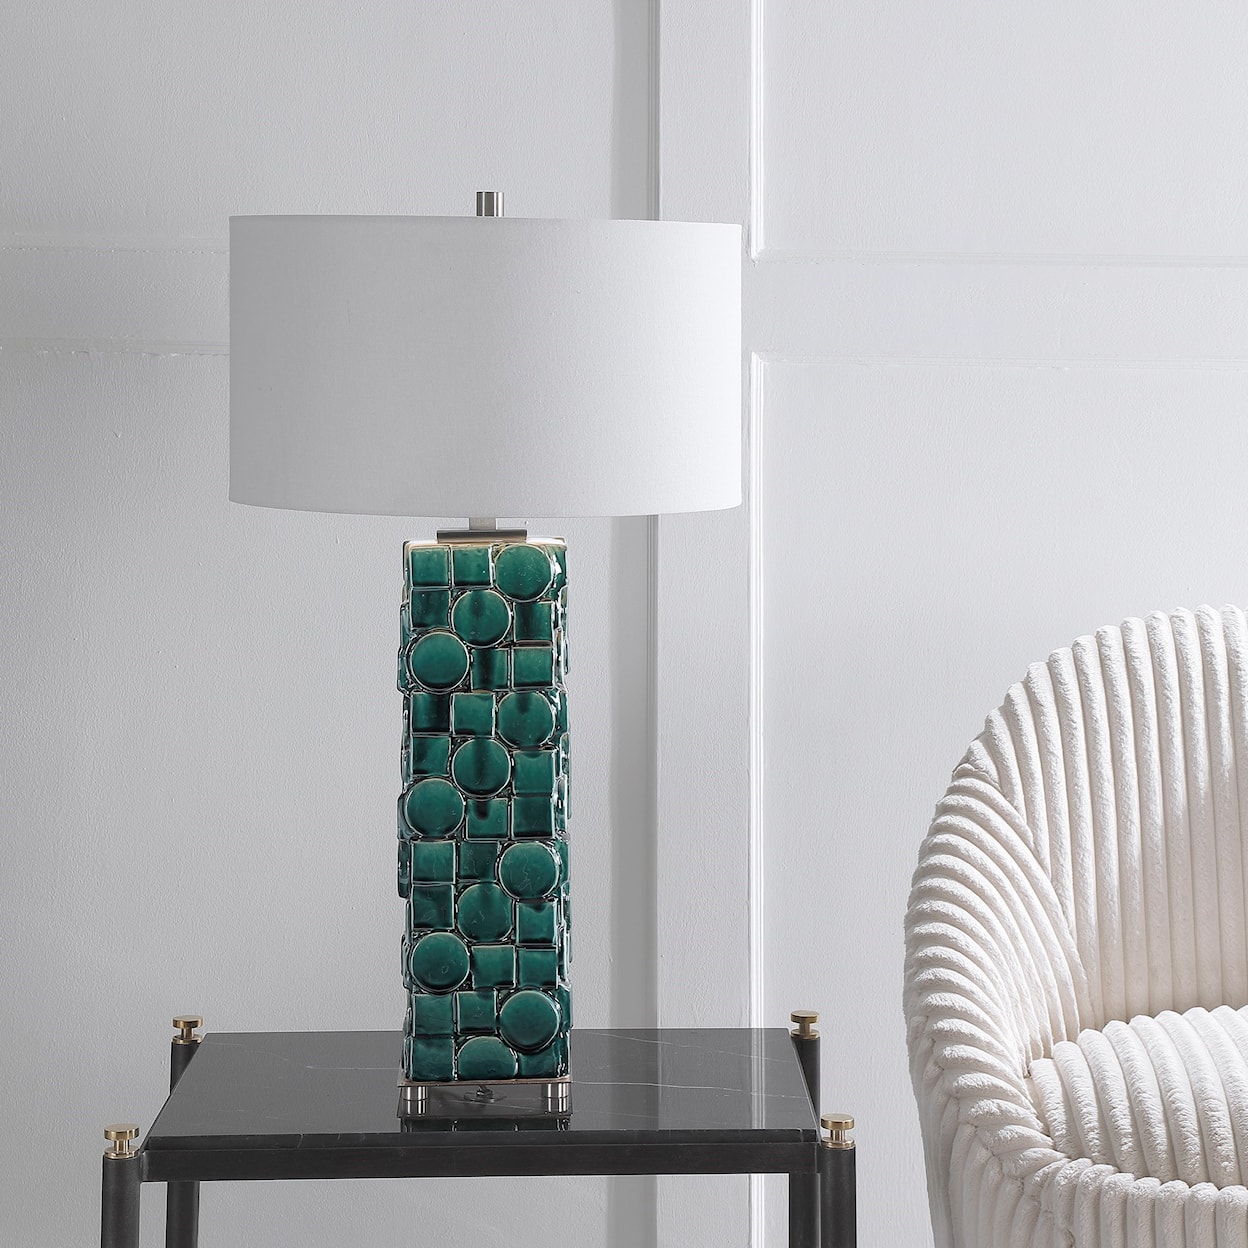 Uttermost Table Lamps Geometry Green Table Lamp